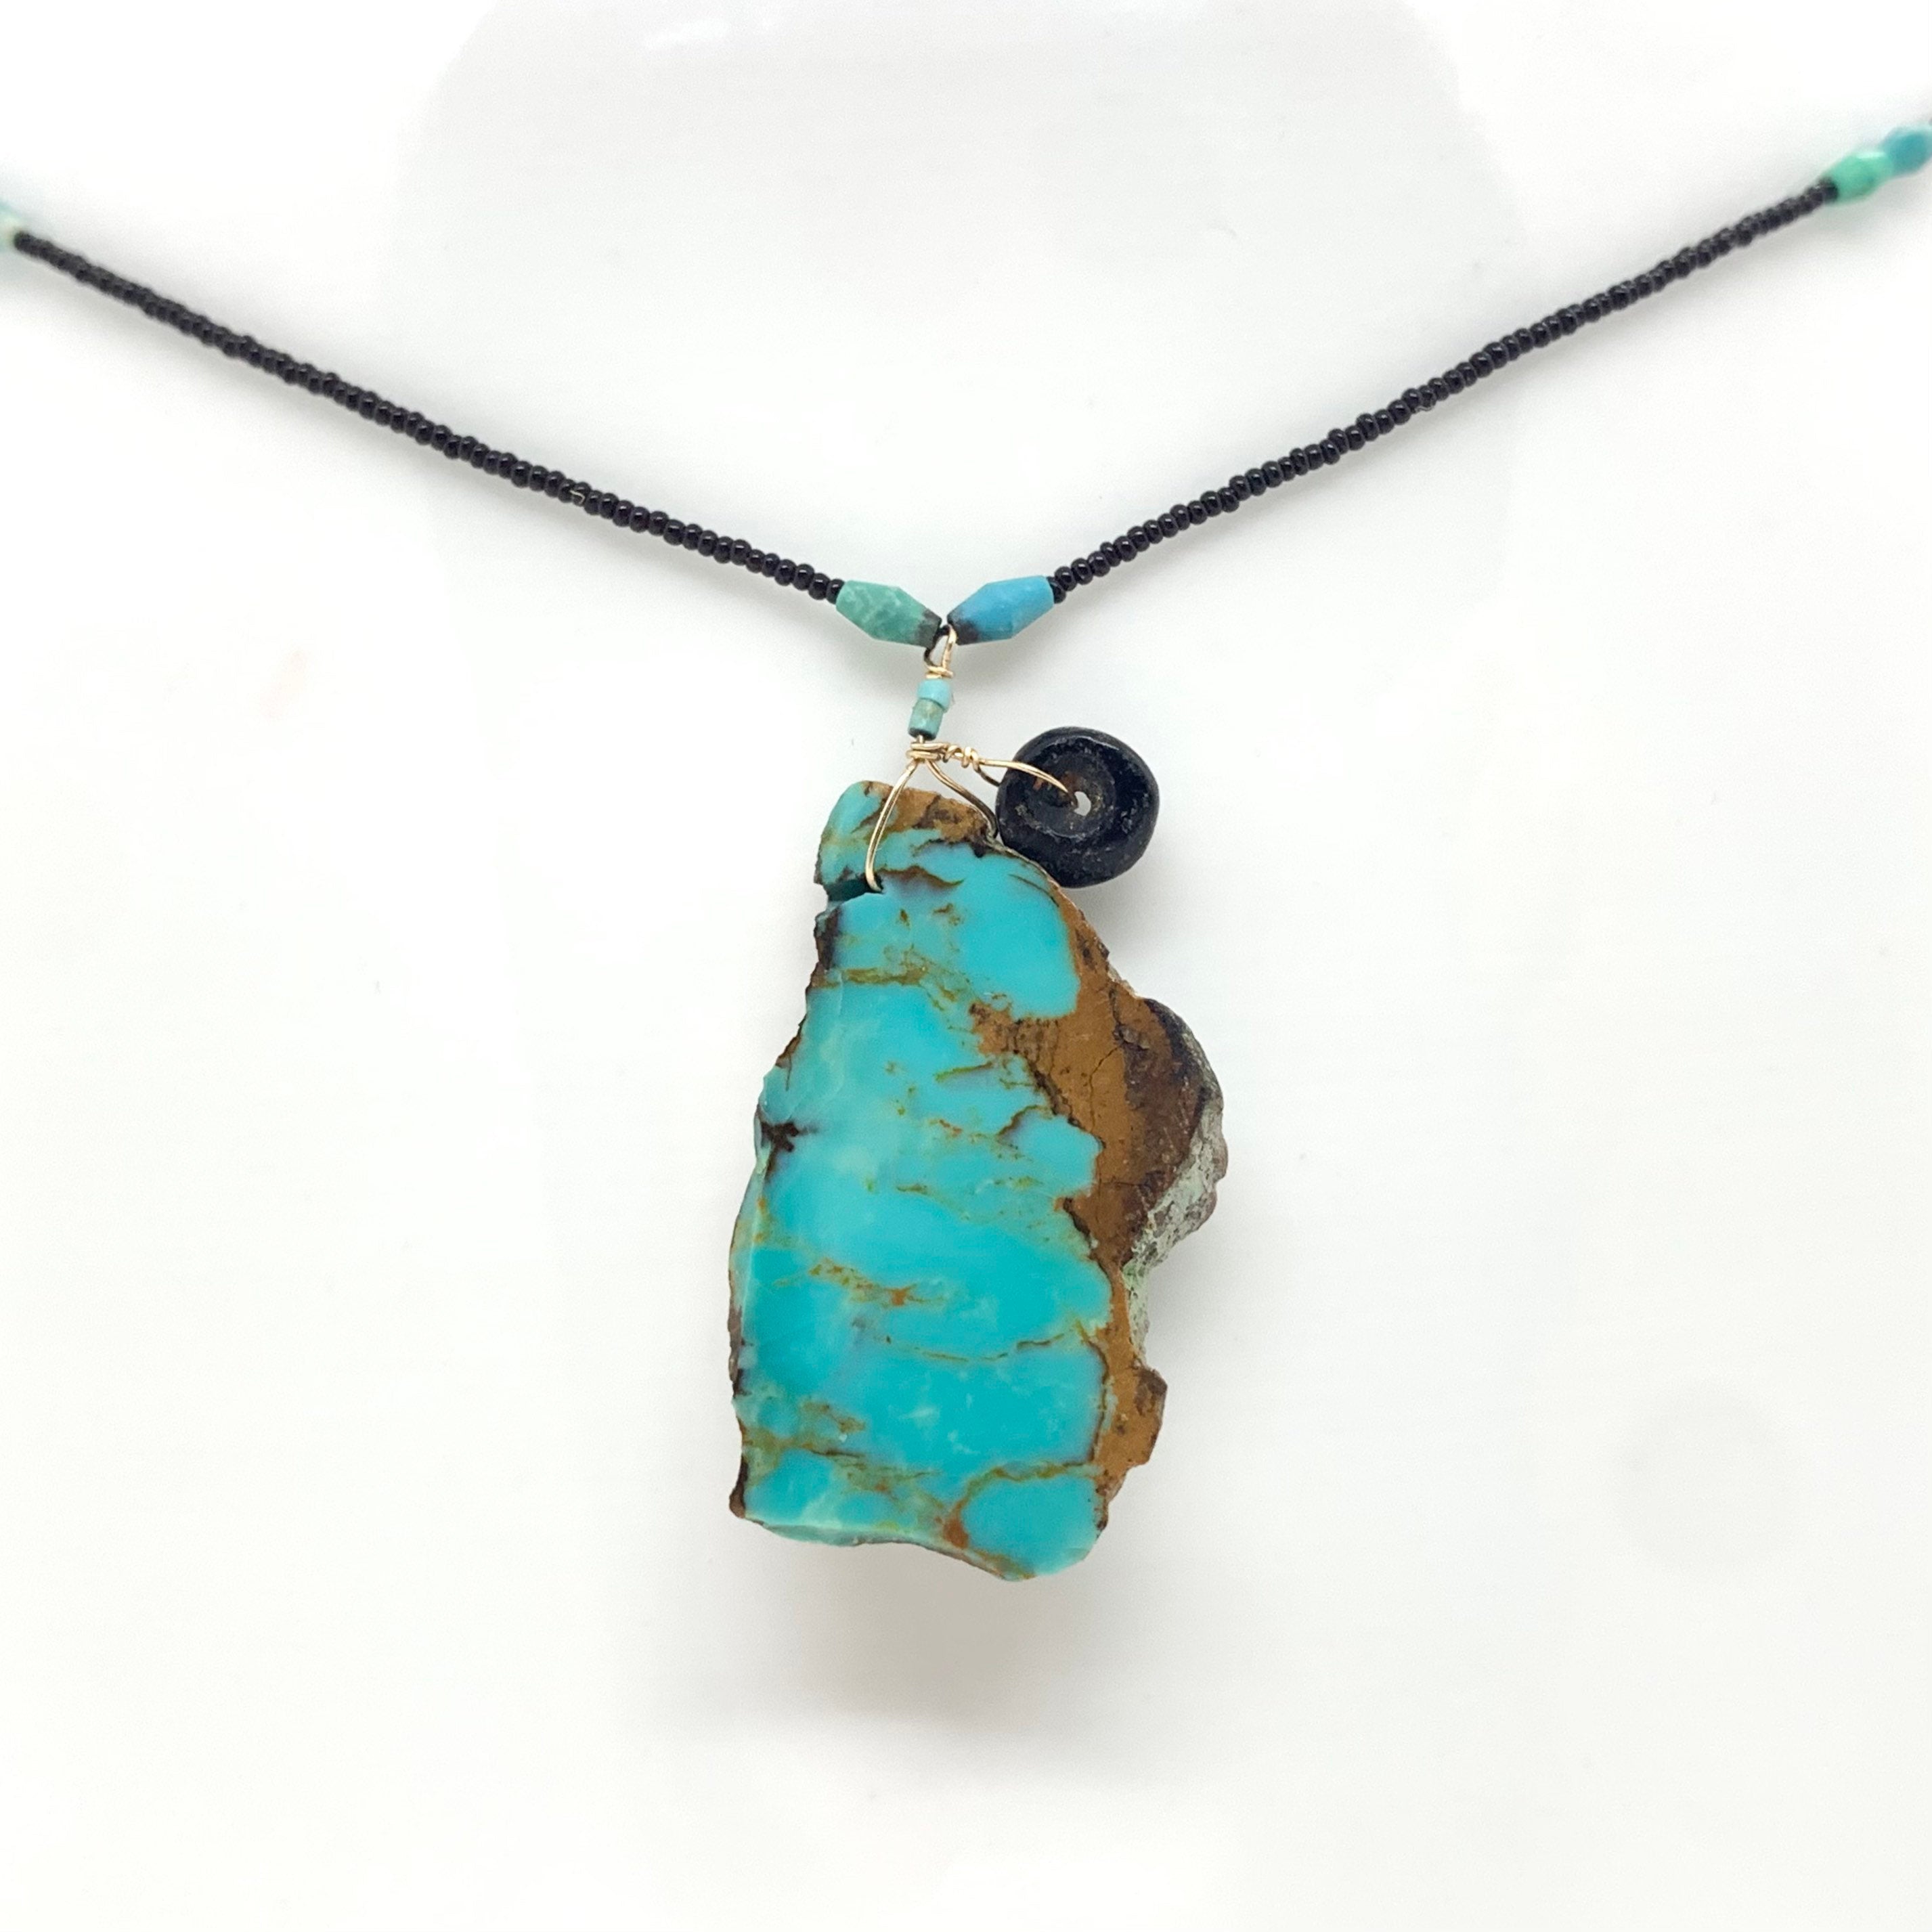 String Beaded Necklace w/ Turquoise Pendant, Pre-Columbian Bead, Afghan Turquoise & Antique Italian Beads